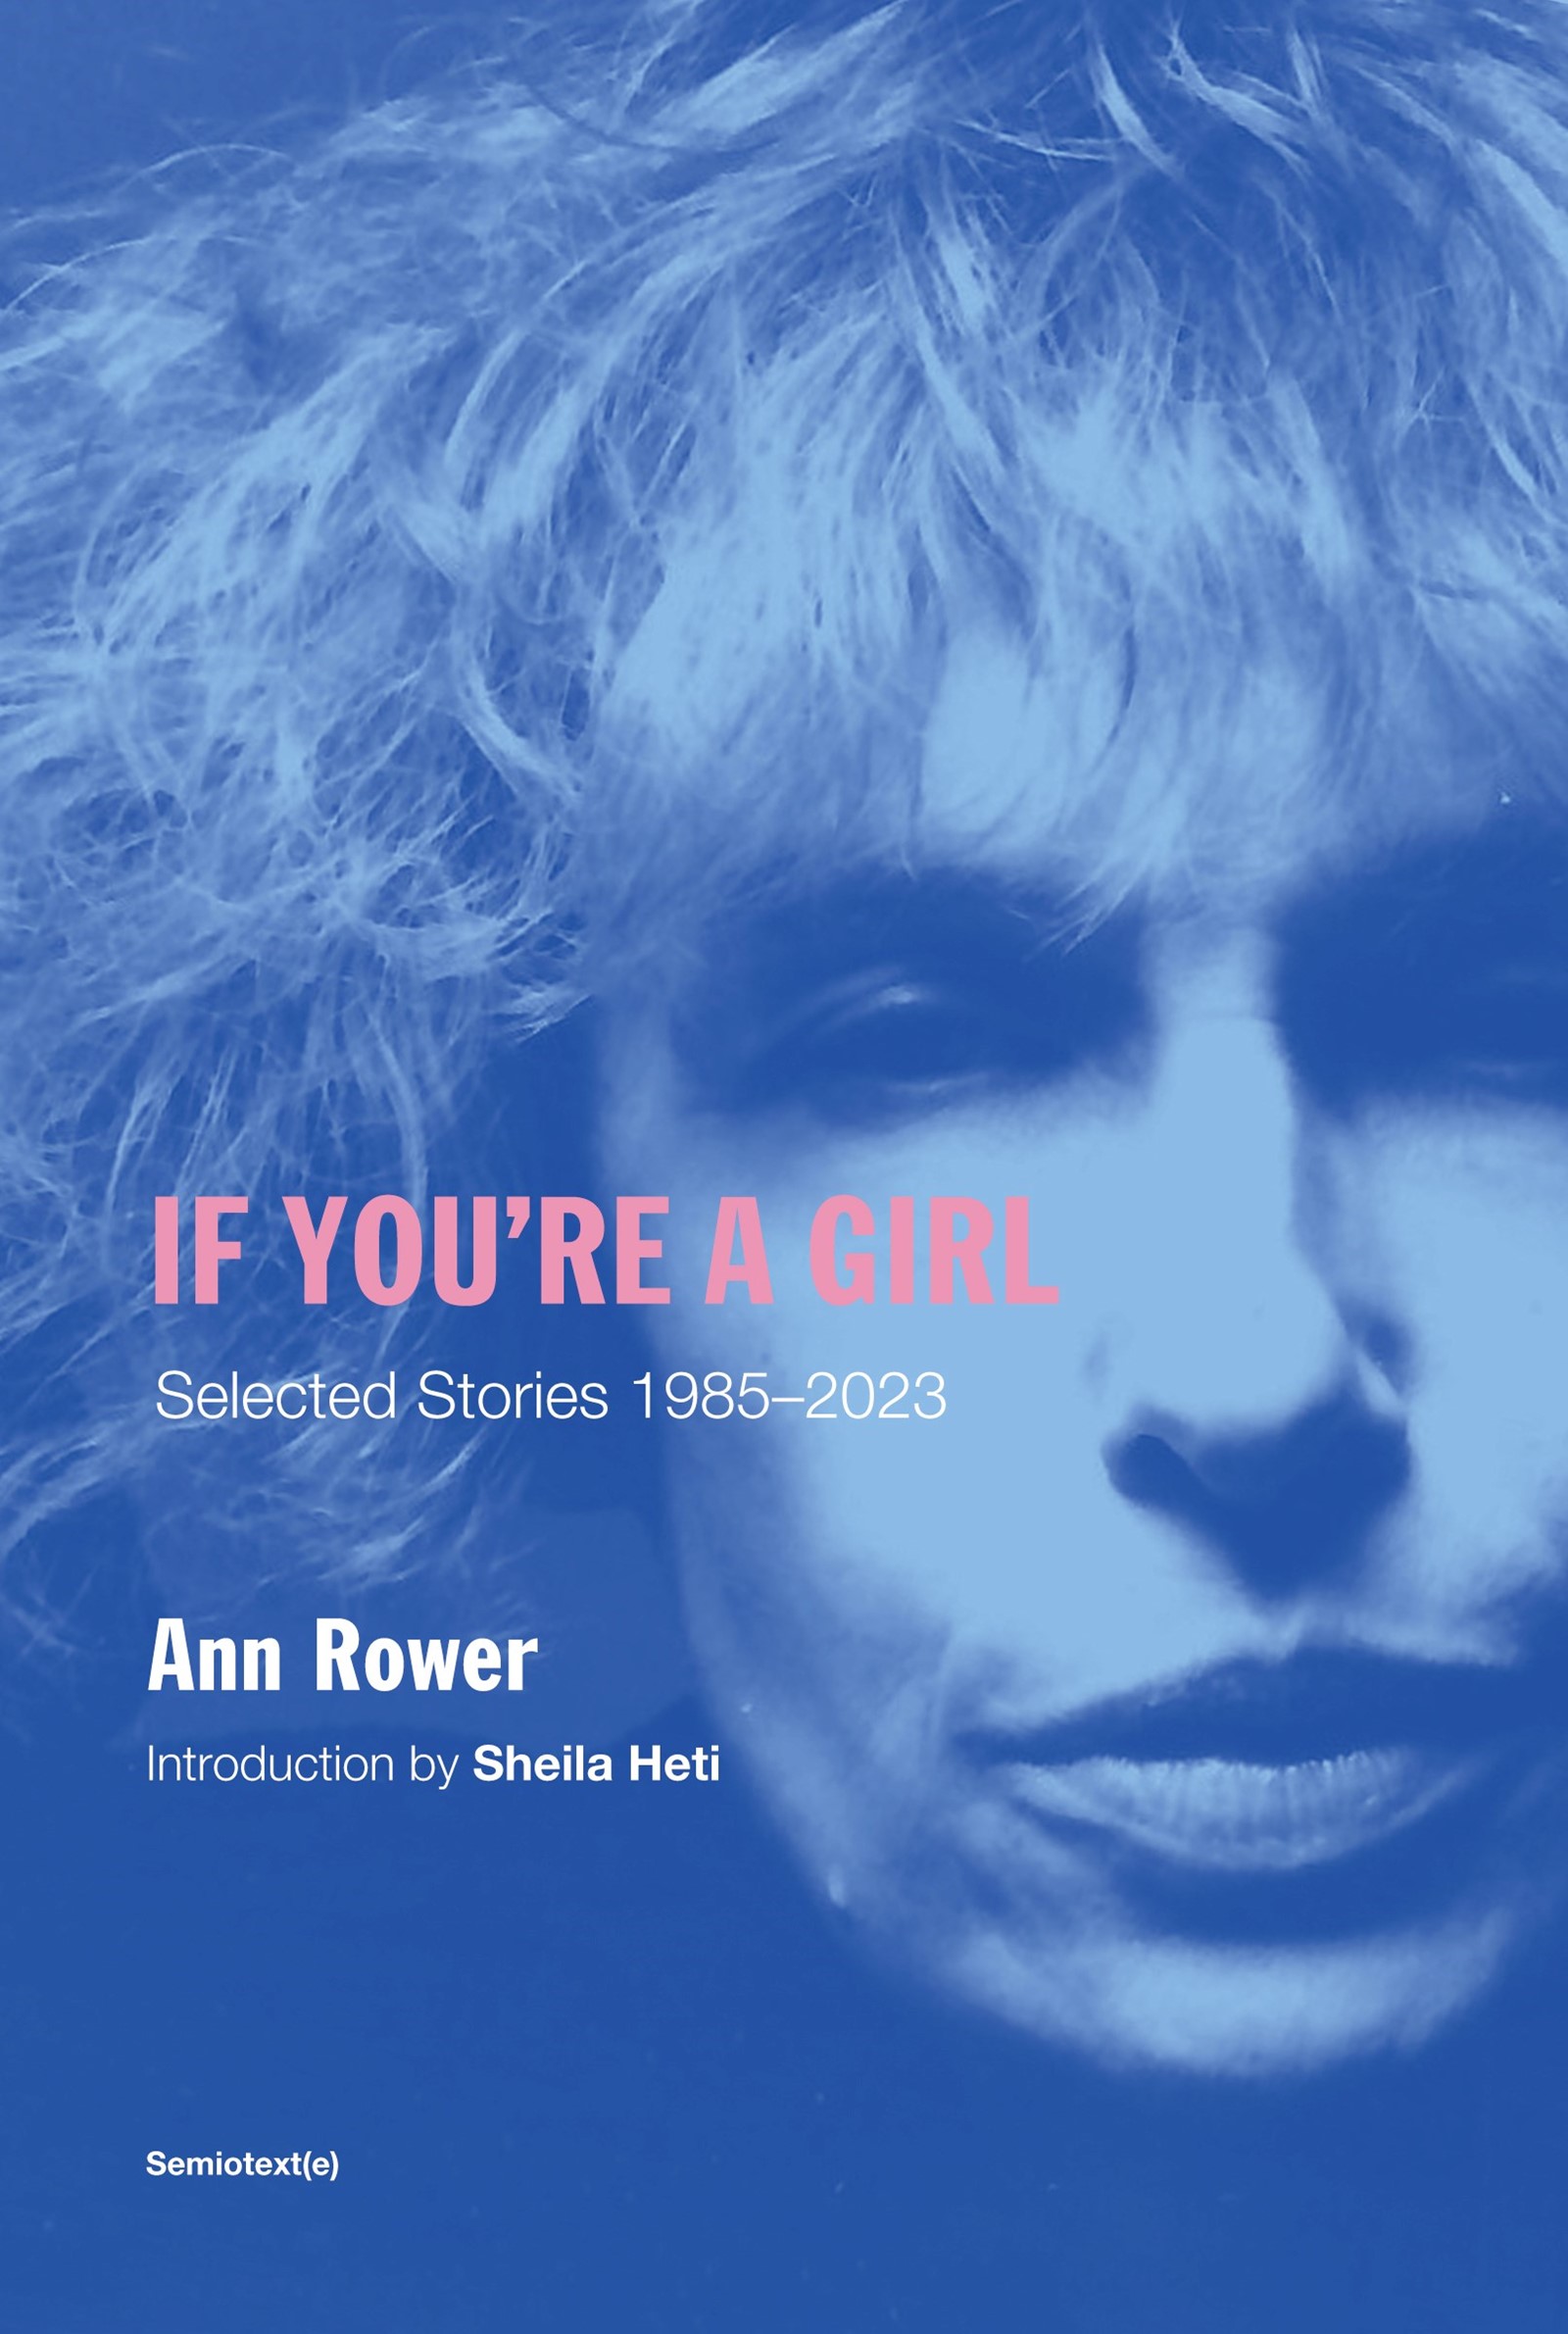 If You’re a Girl by Ann Rower